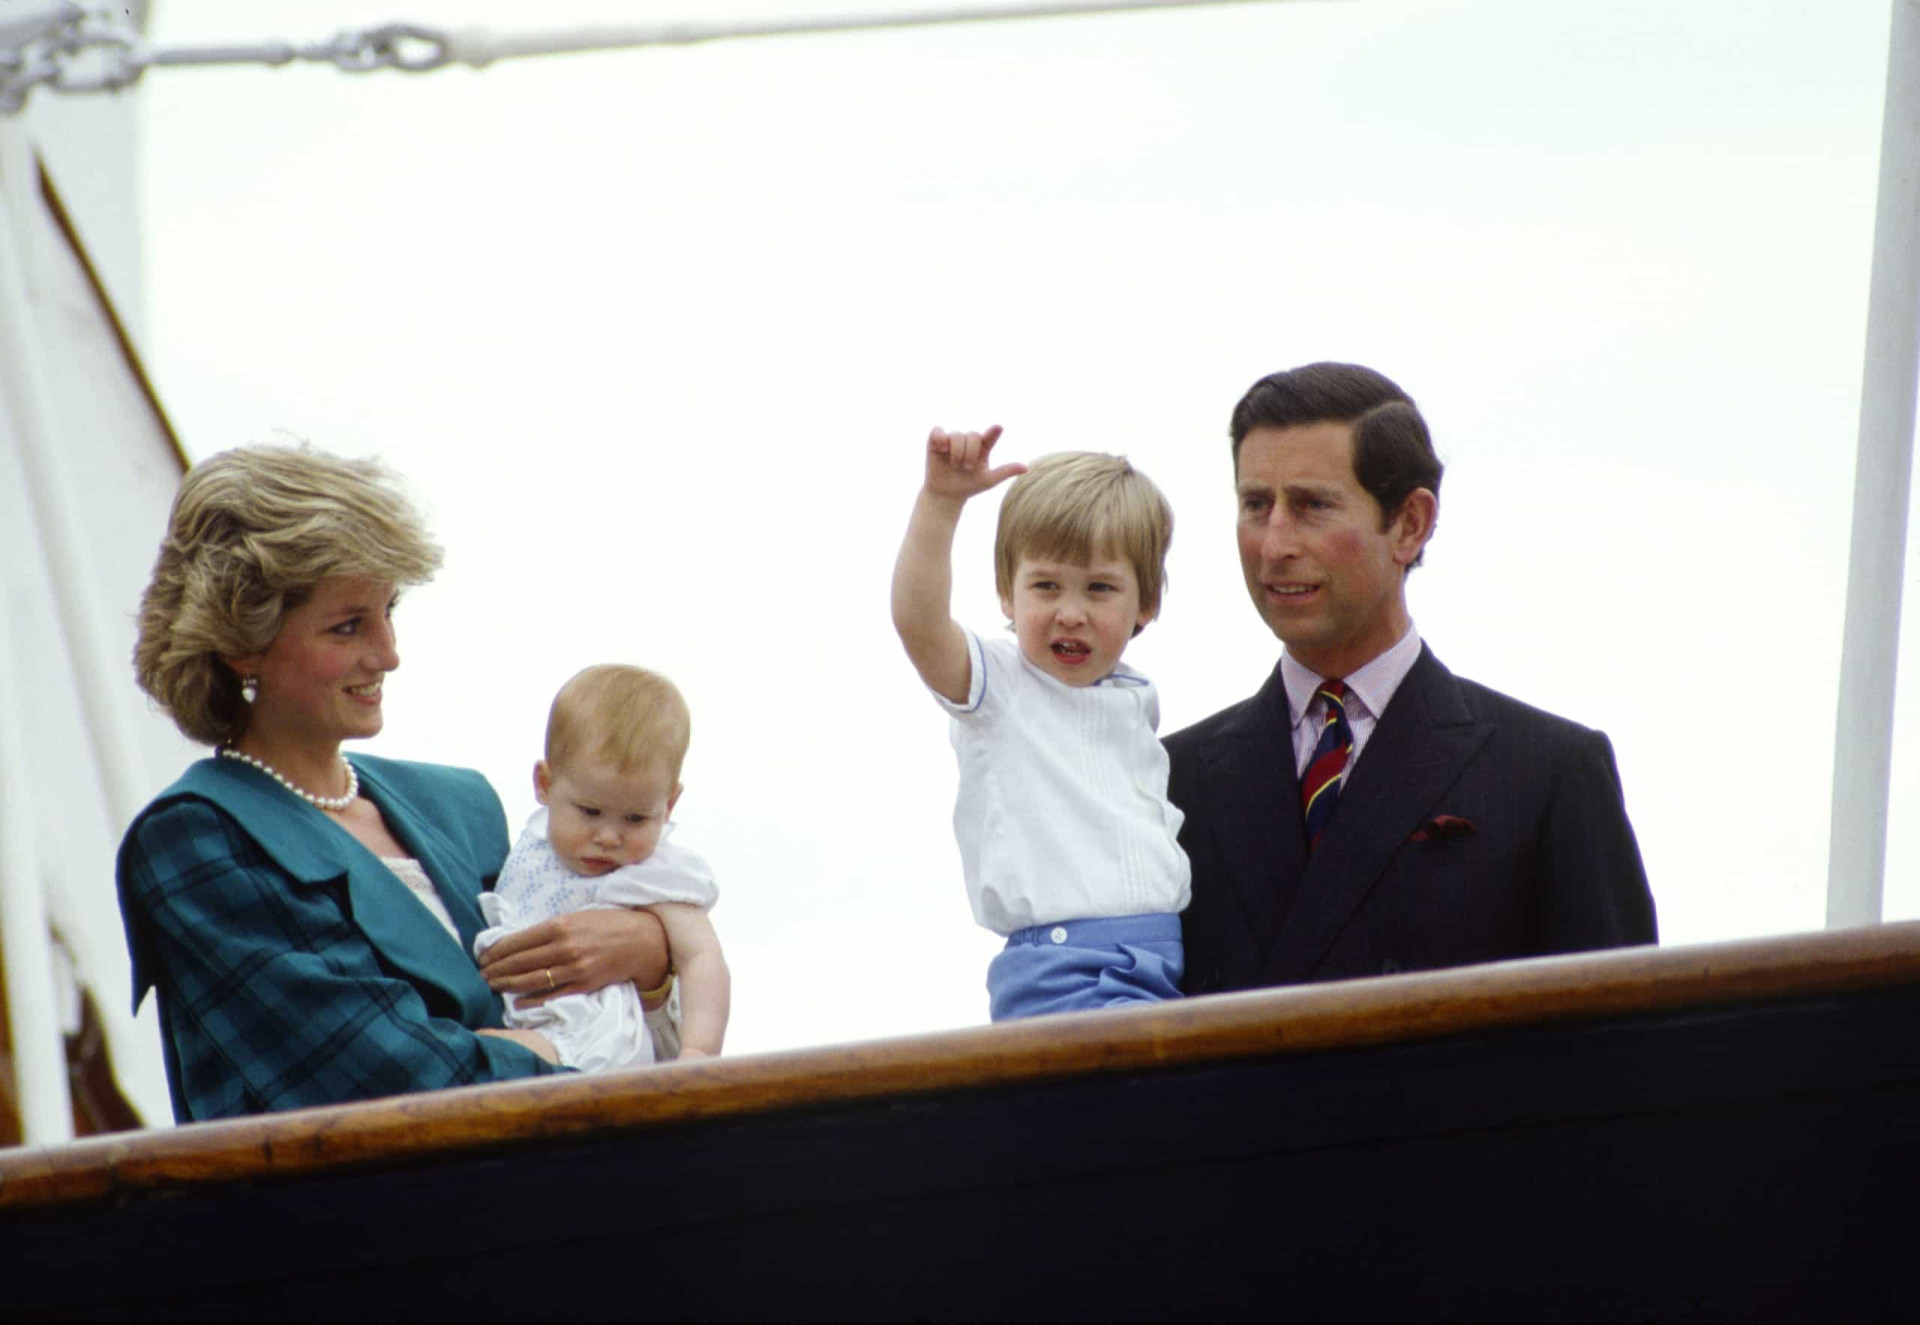 <p>Joining Prince Charles and Princess Diana on their 17-day tour of Italy's sights and cities in April-May 1985 was Prince William and Prince Harry. The family are seen on board <em>Britannia</em> at Venice.</p><p>You may also like:<a href="https://www.starsinsider.com/n/394782?utm_source=msn.com&utm_medium=display&utm_campaign=referral_description&utm_content=474709v1en-us"> The most unbelievably expensive weddings in history </a></p>